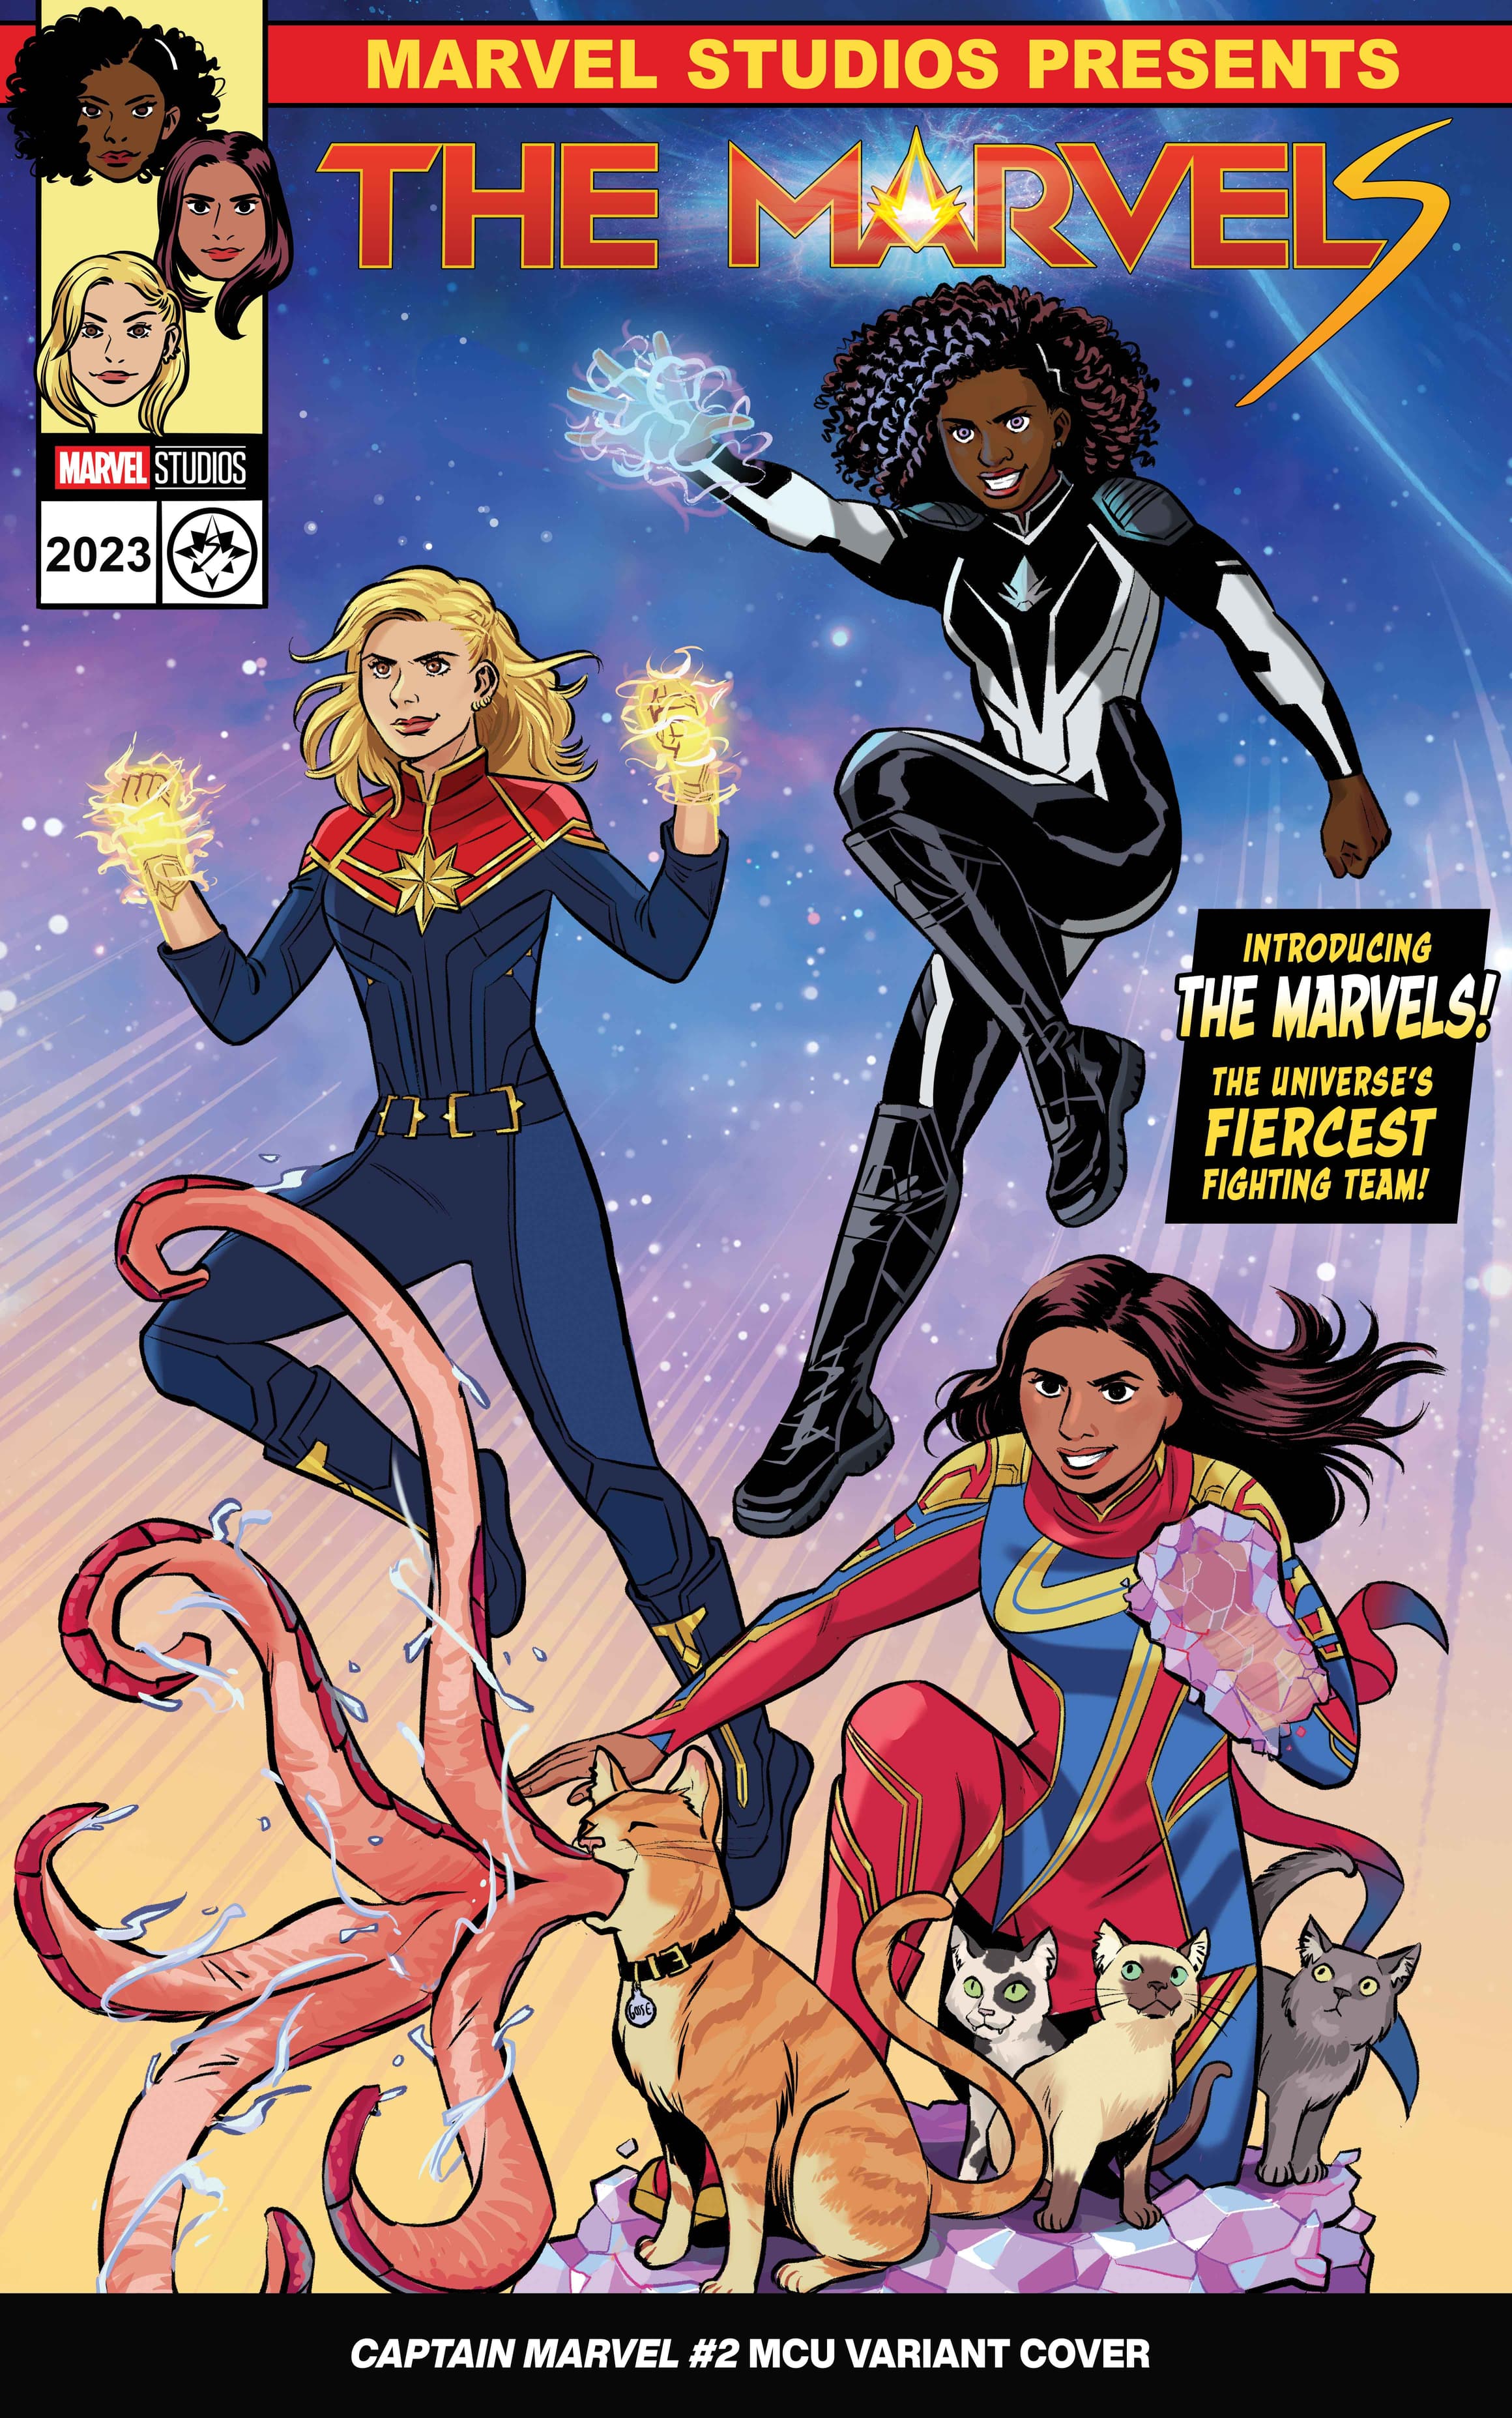 Celebrate Captain Marvel S Return To The Big Screen And New Comic Book Launches With Special Mcu